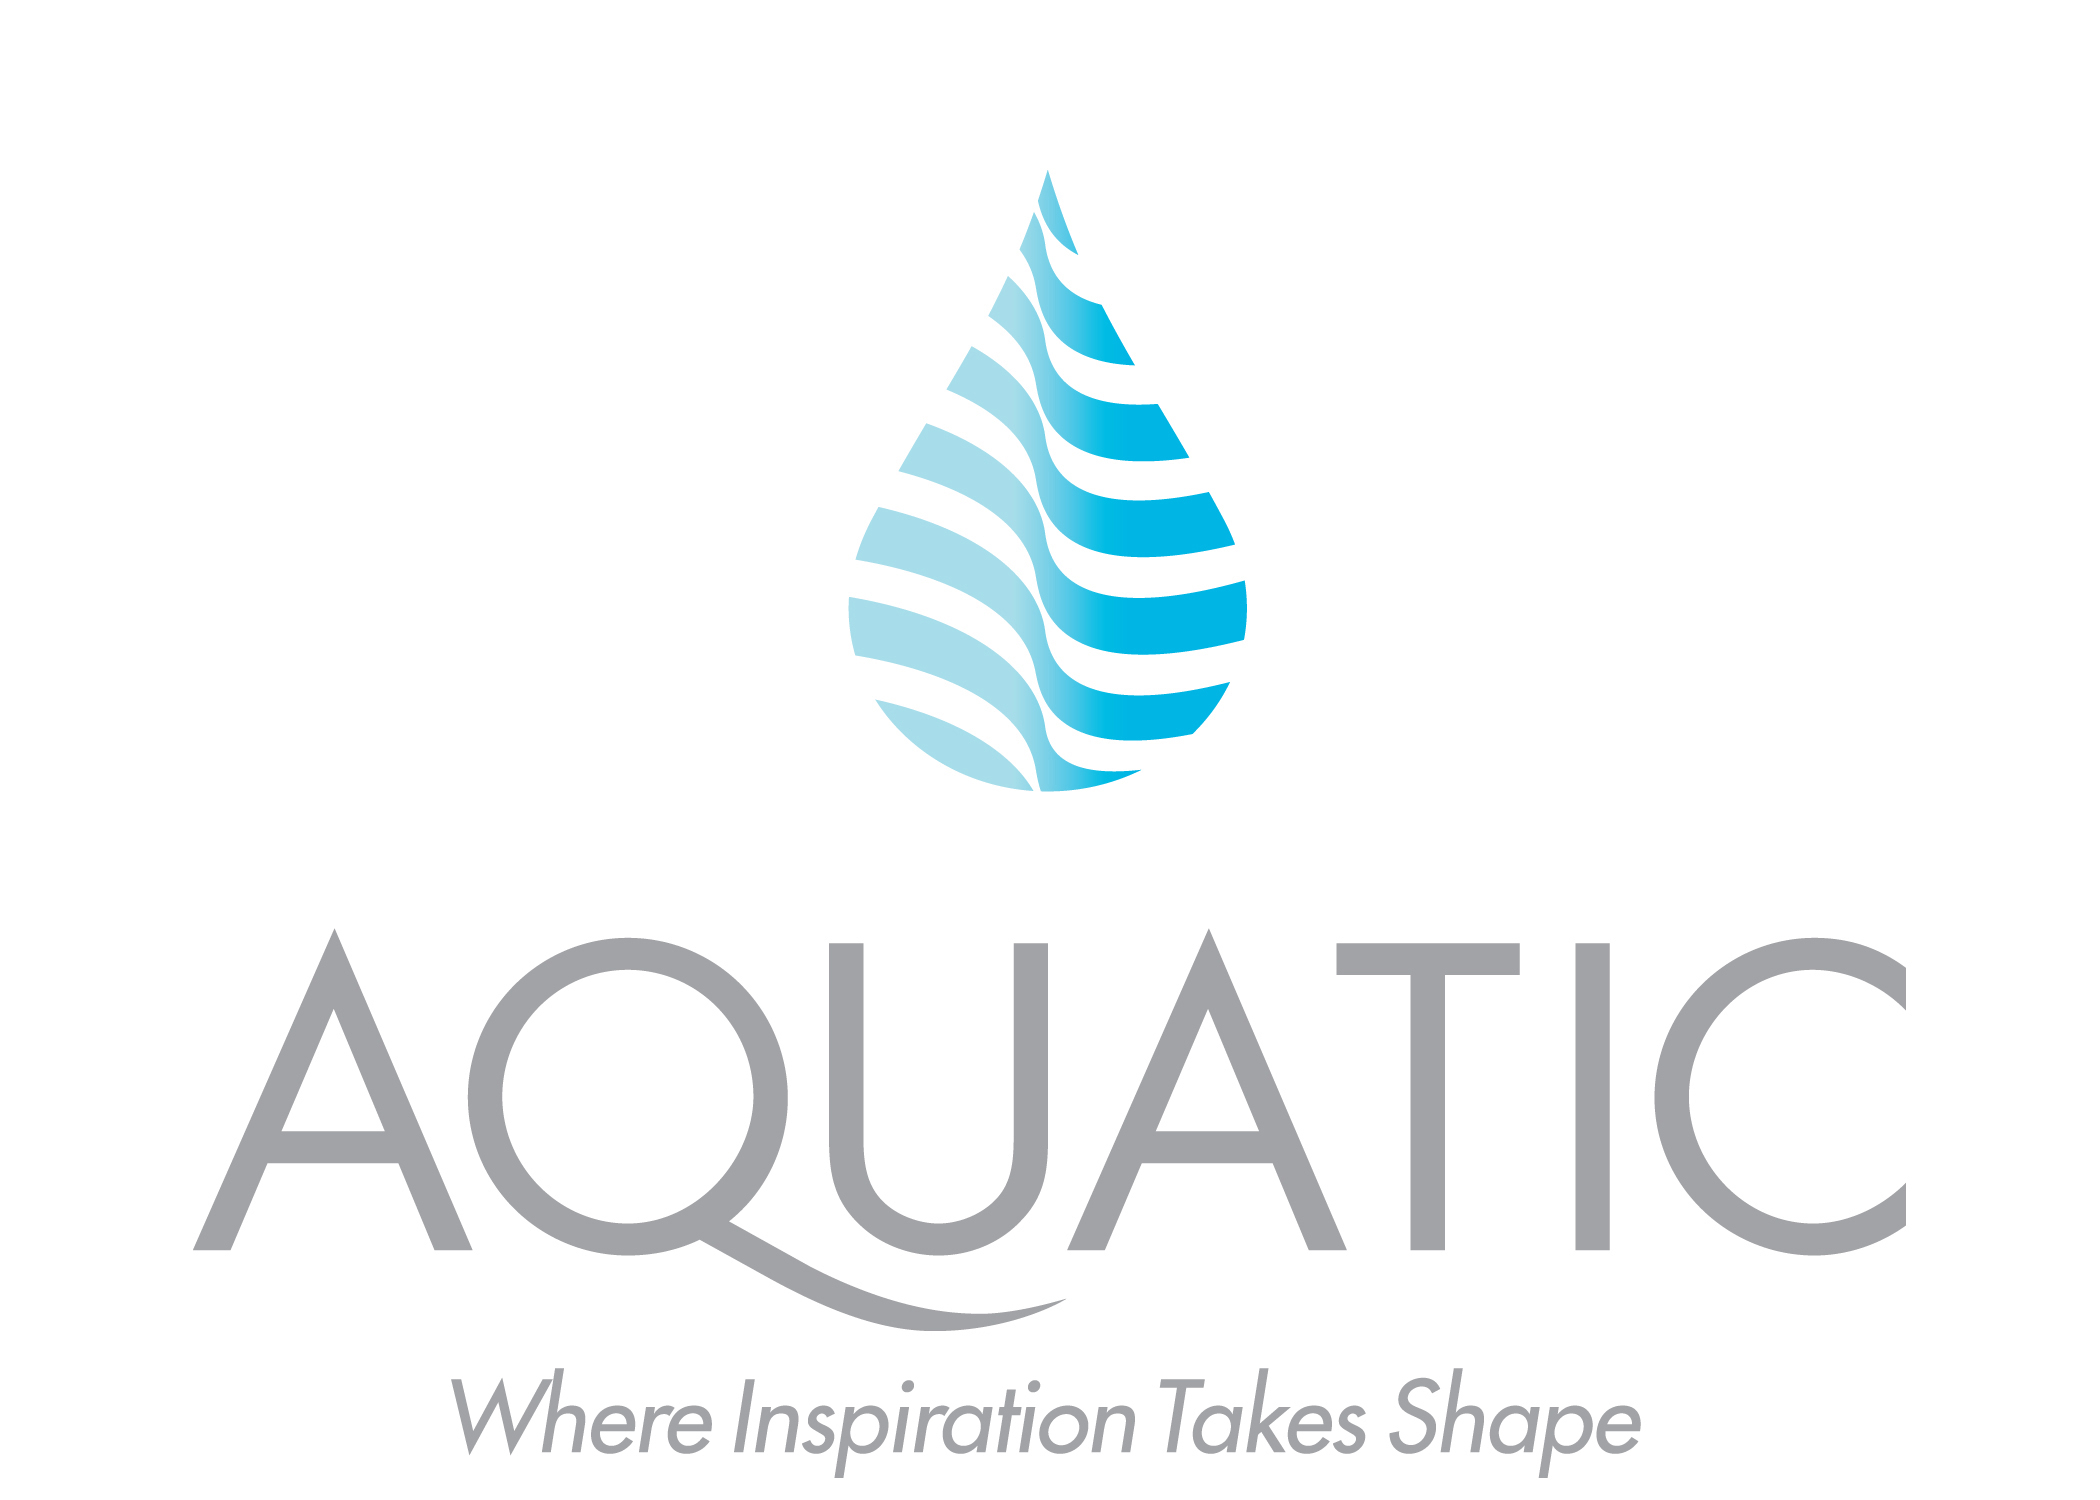 Aquatic Expands Operations Again Opening of New Multi-Purpose Facility in Southern California